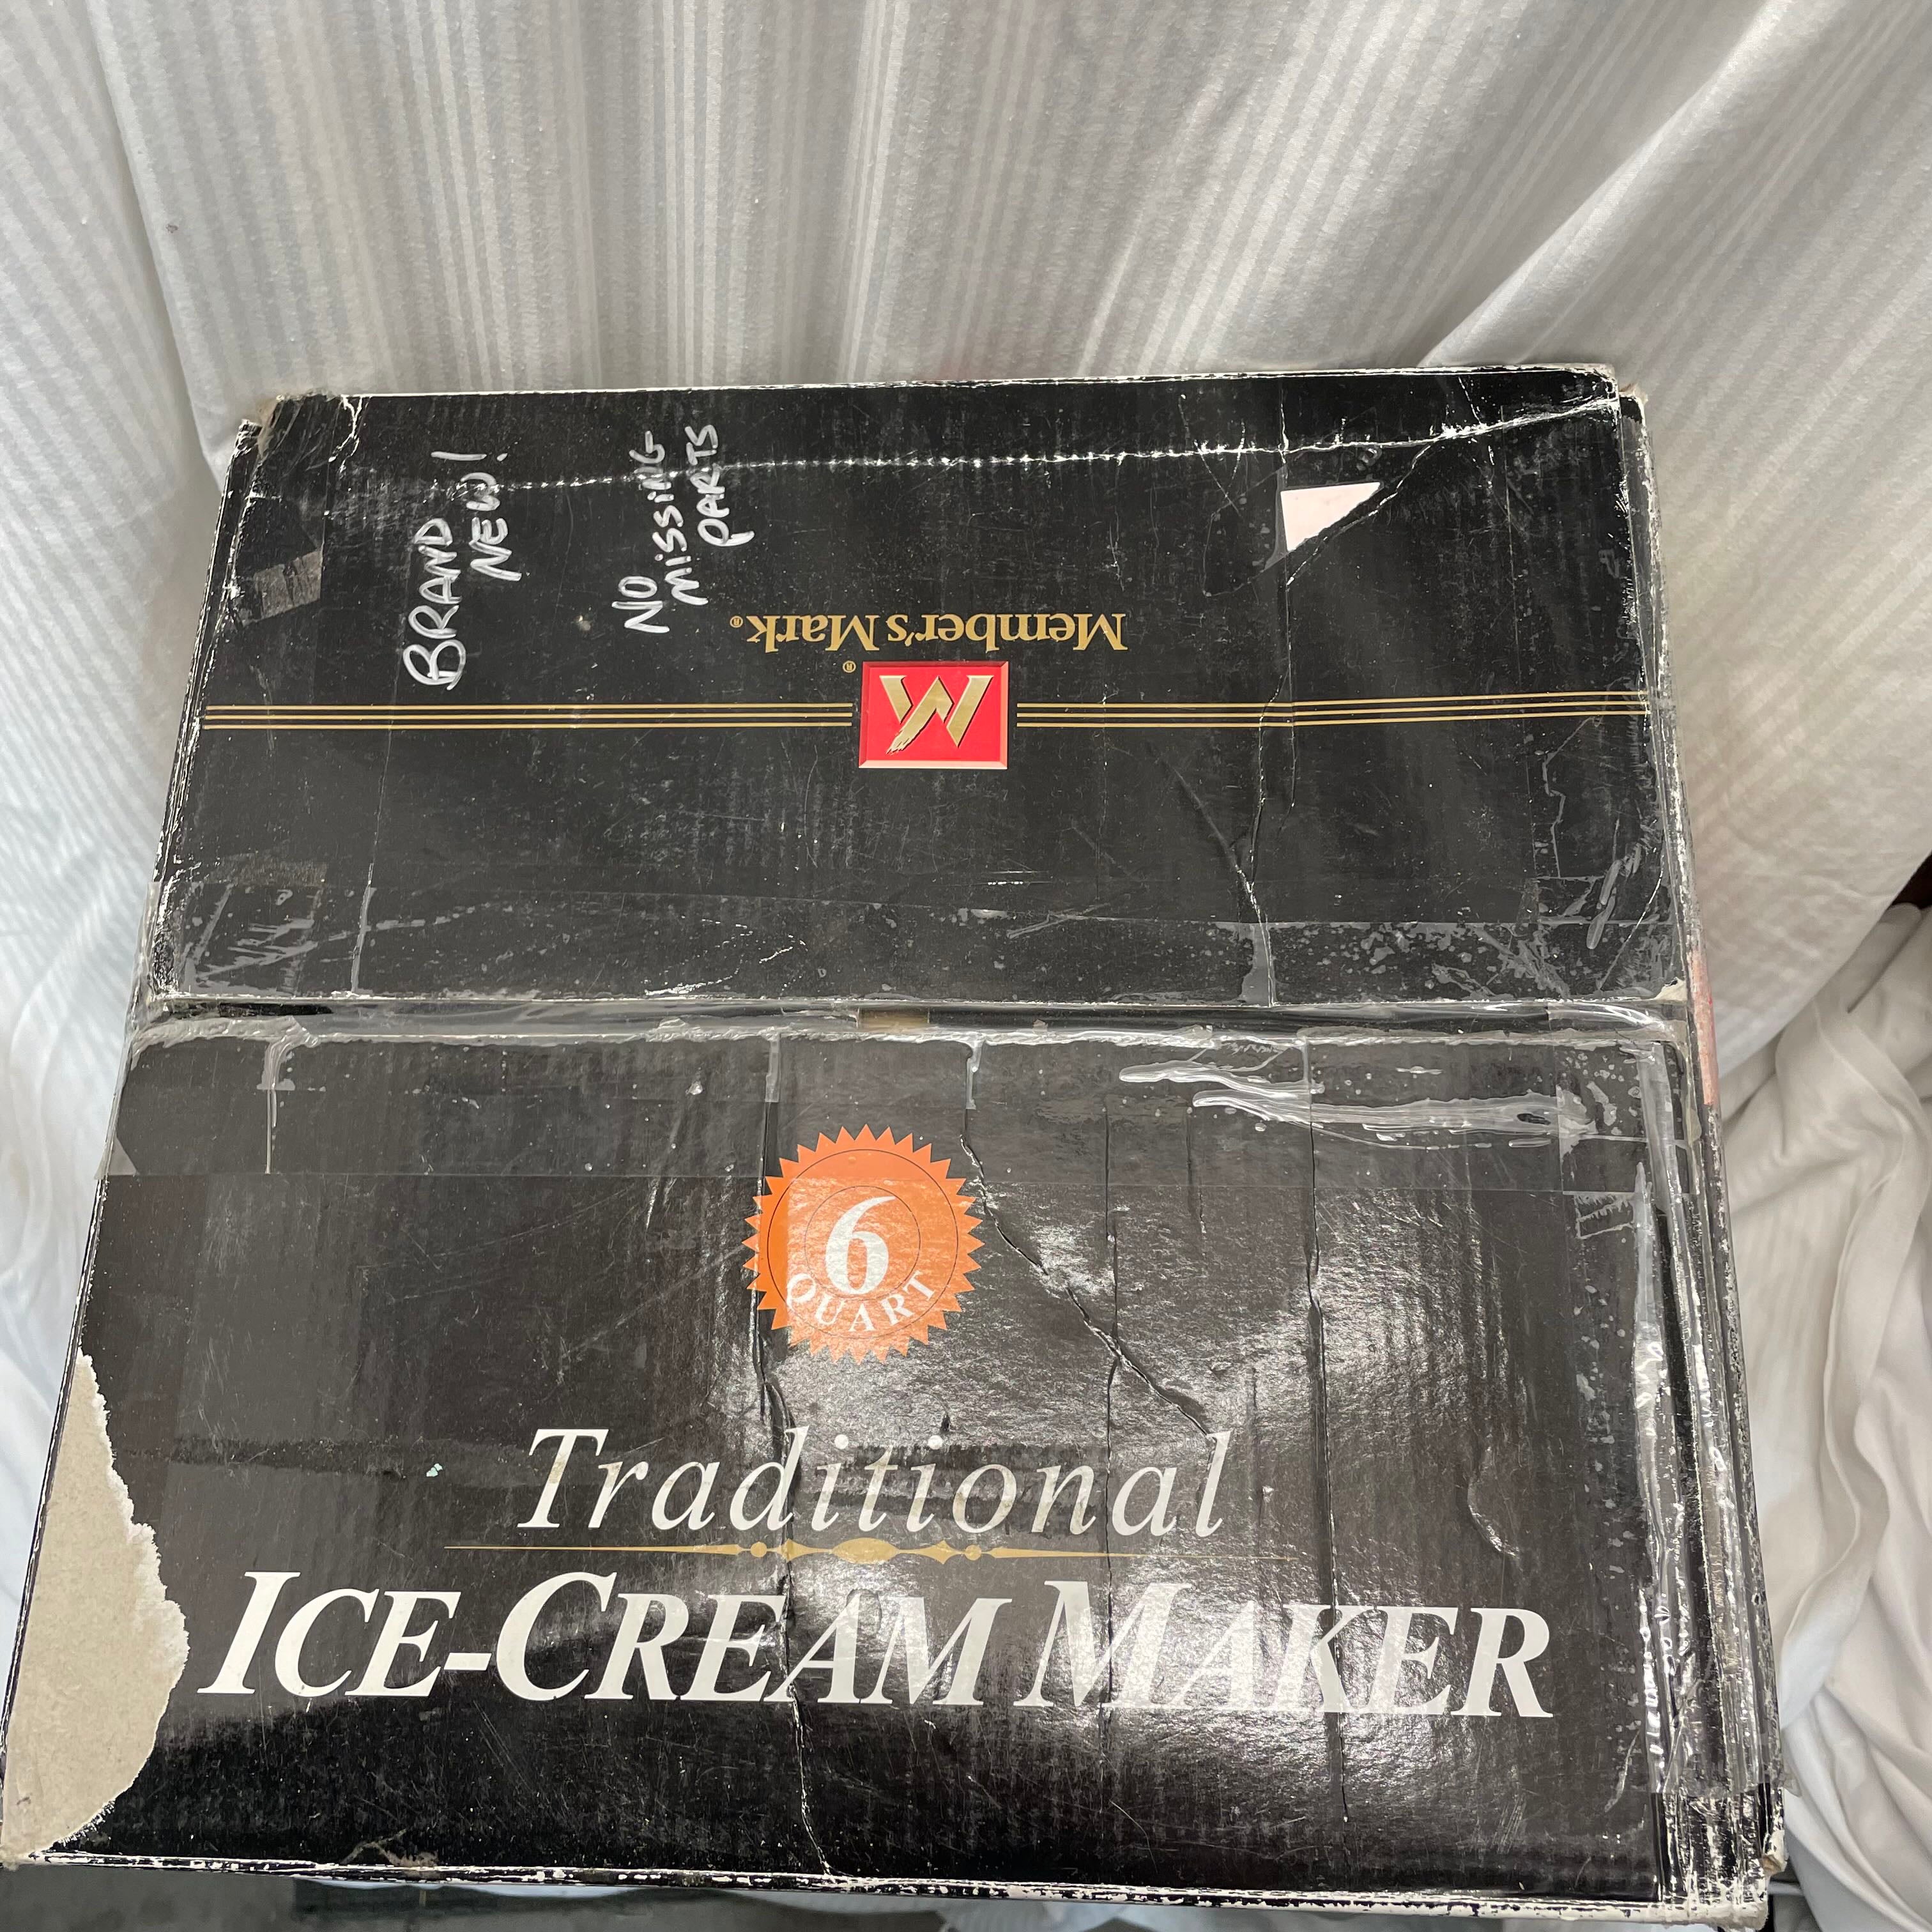 6 Qt. Members Mark Traditional or Automated Ice Cream Maker